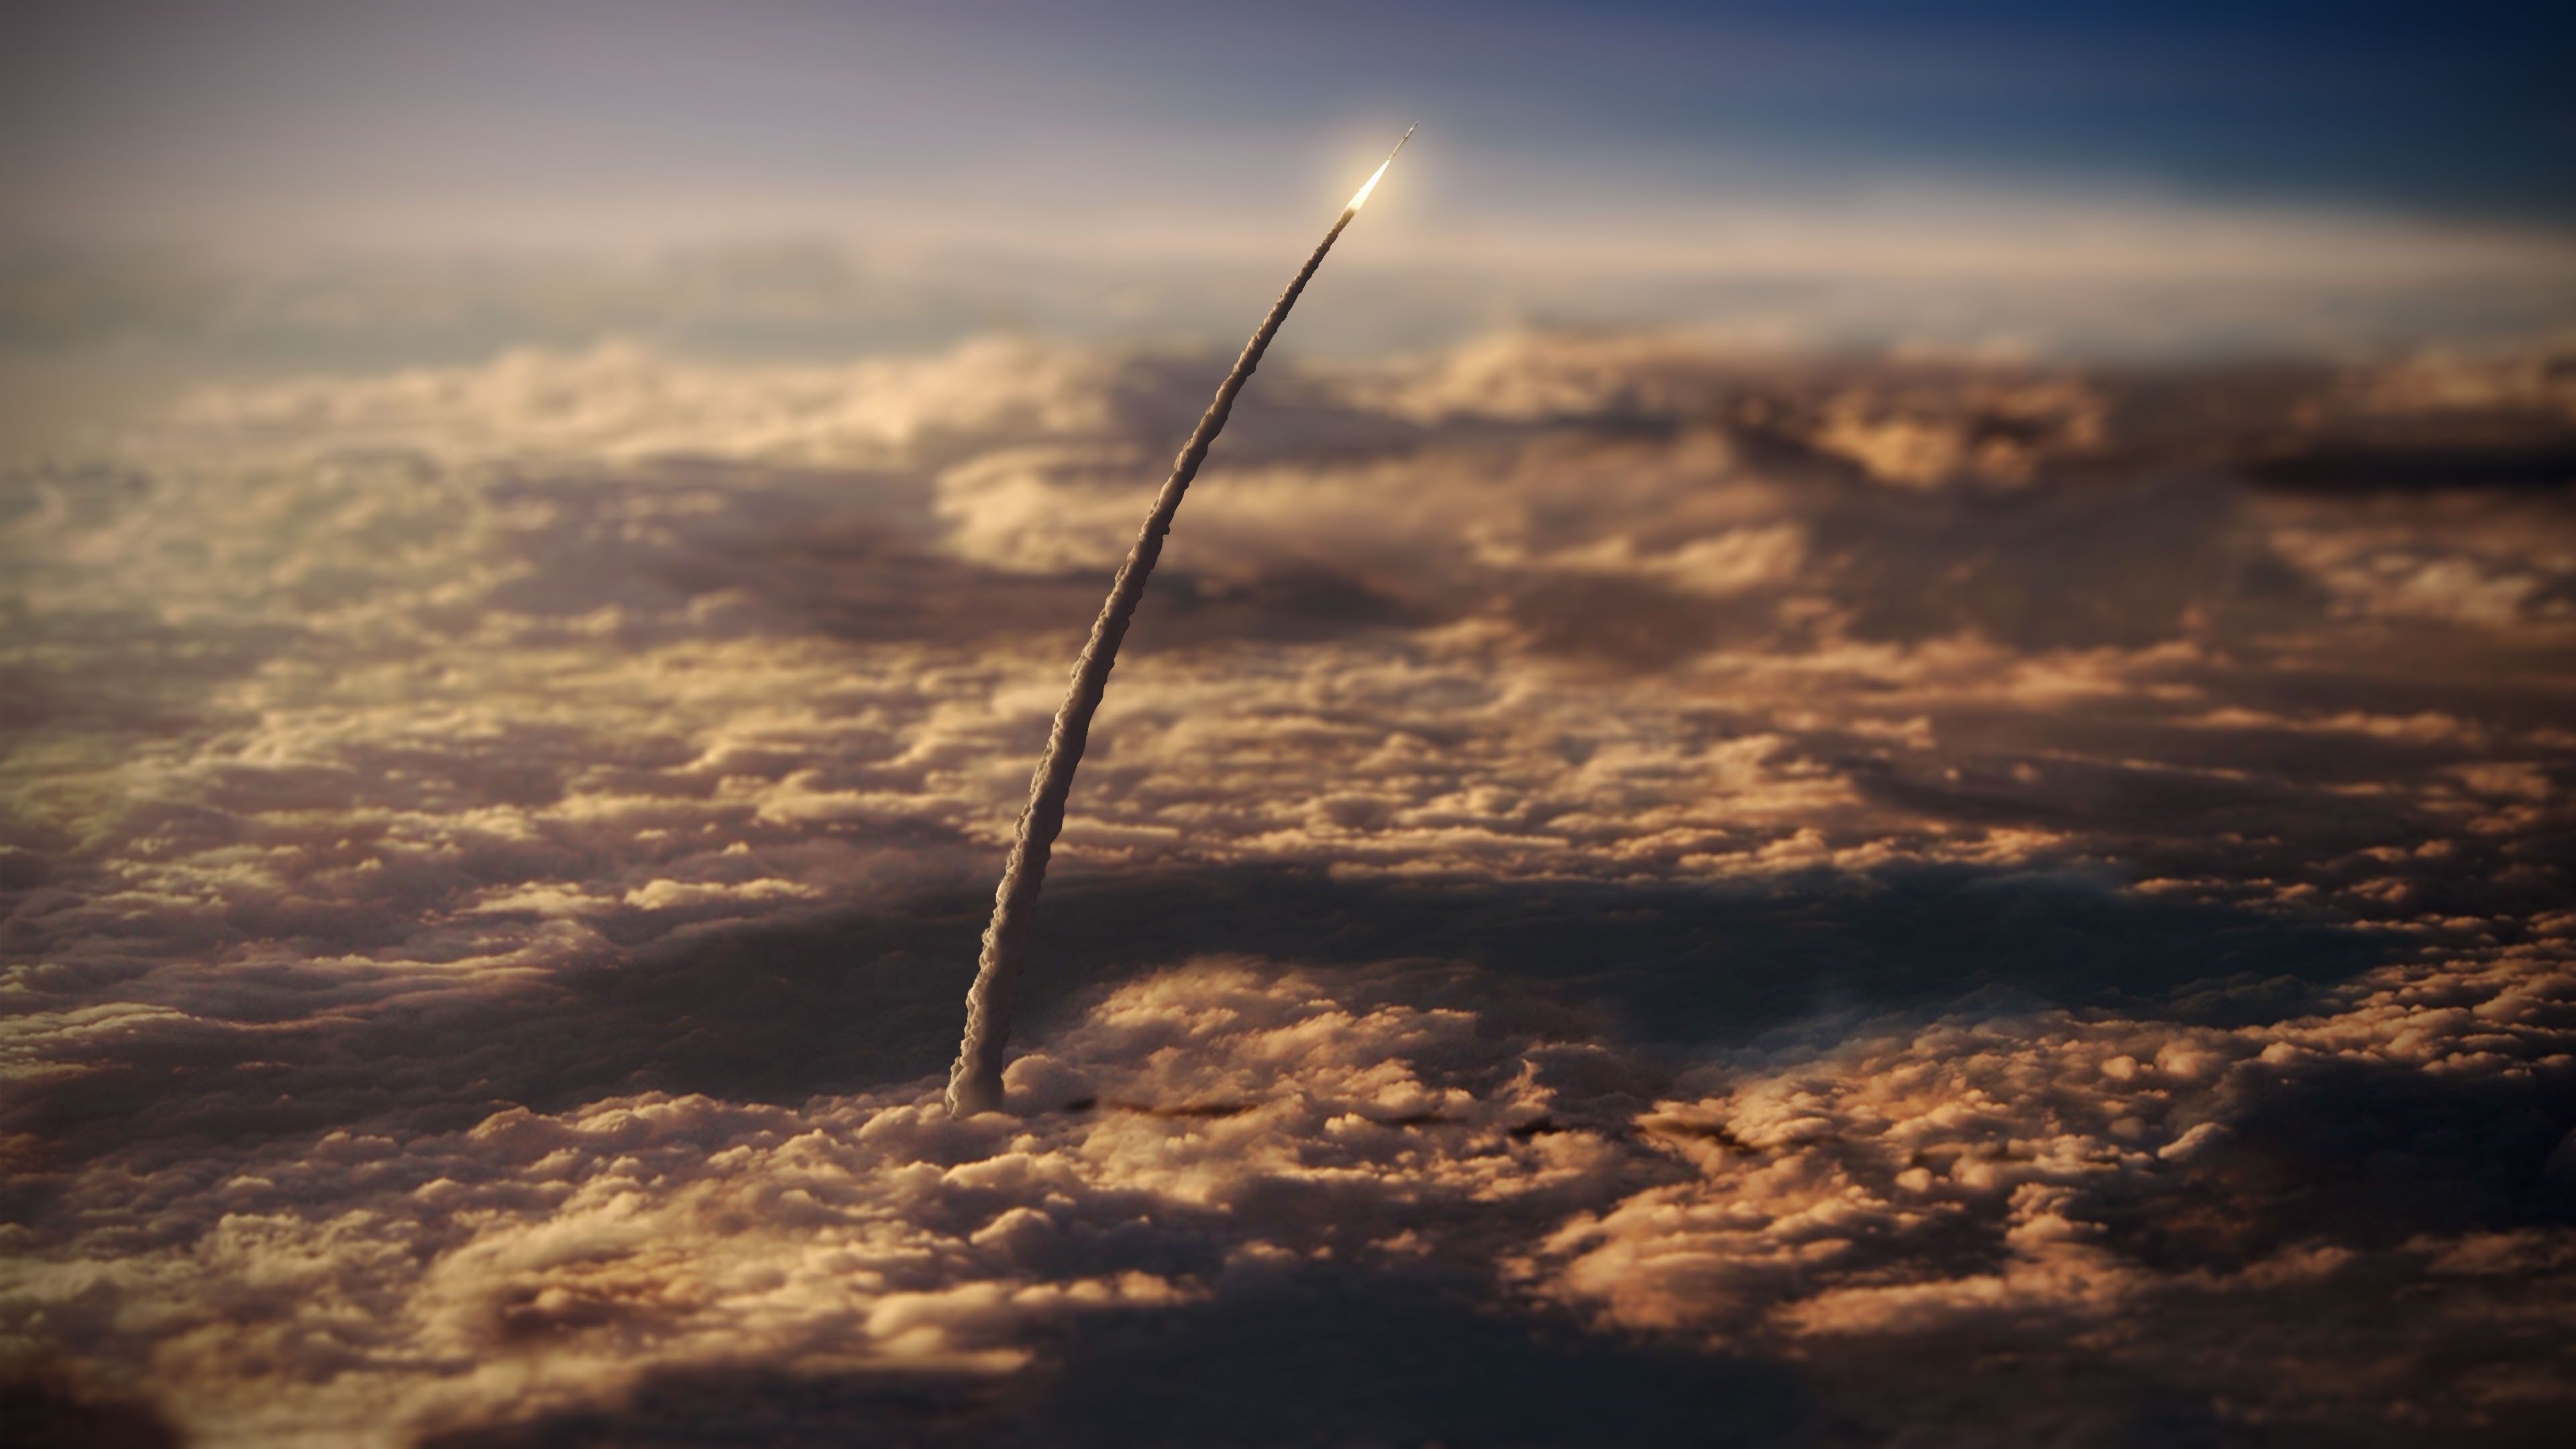 Rocket Launch Photos Download The BEST Free Rocket Launch Stock Photos   HD Images